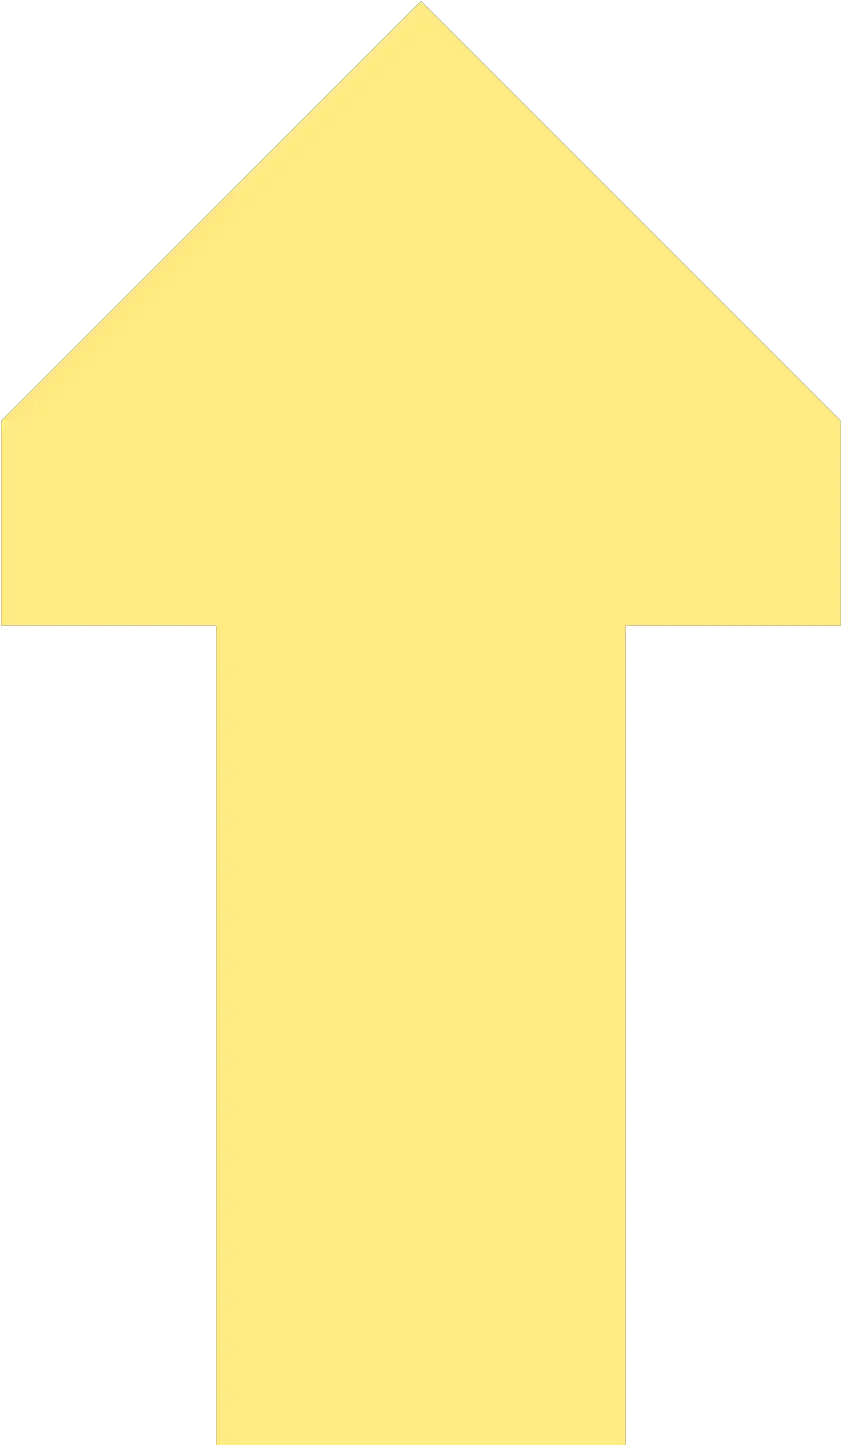 Filebsicon Excontg Yellowsvg Wikipedia Vertical Png Tg Icon